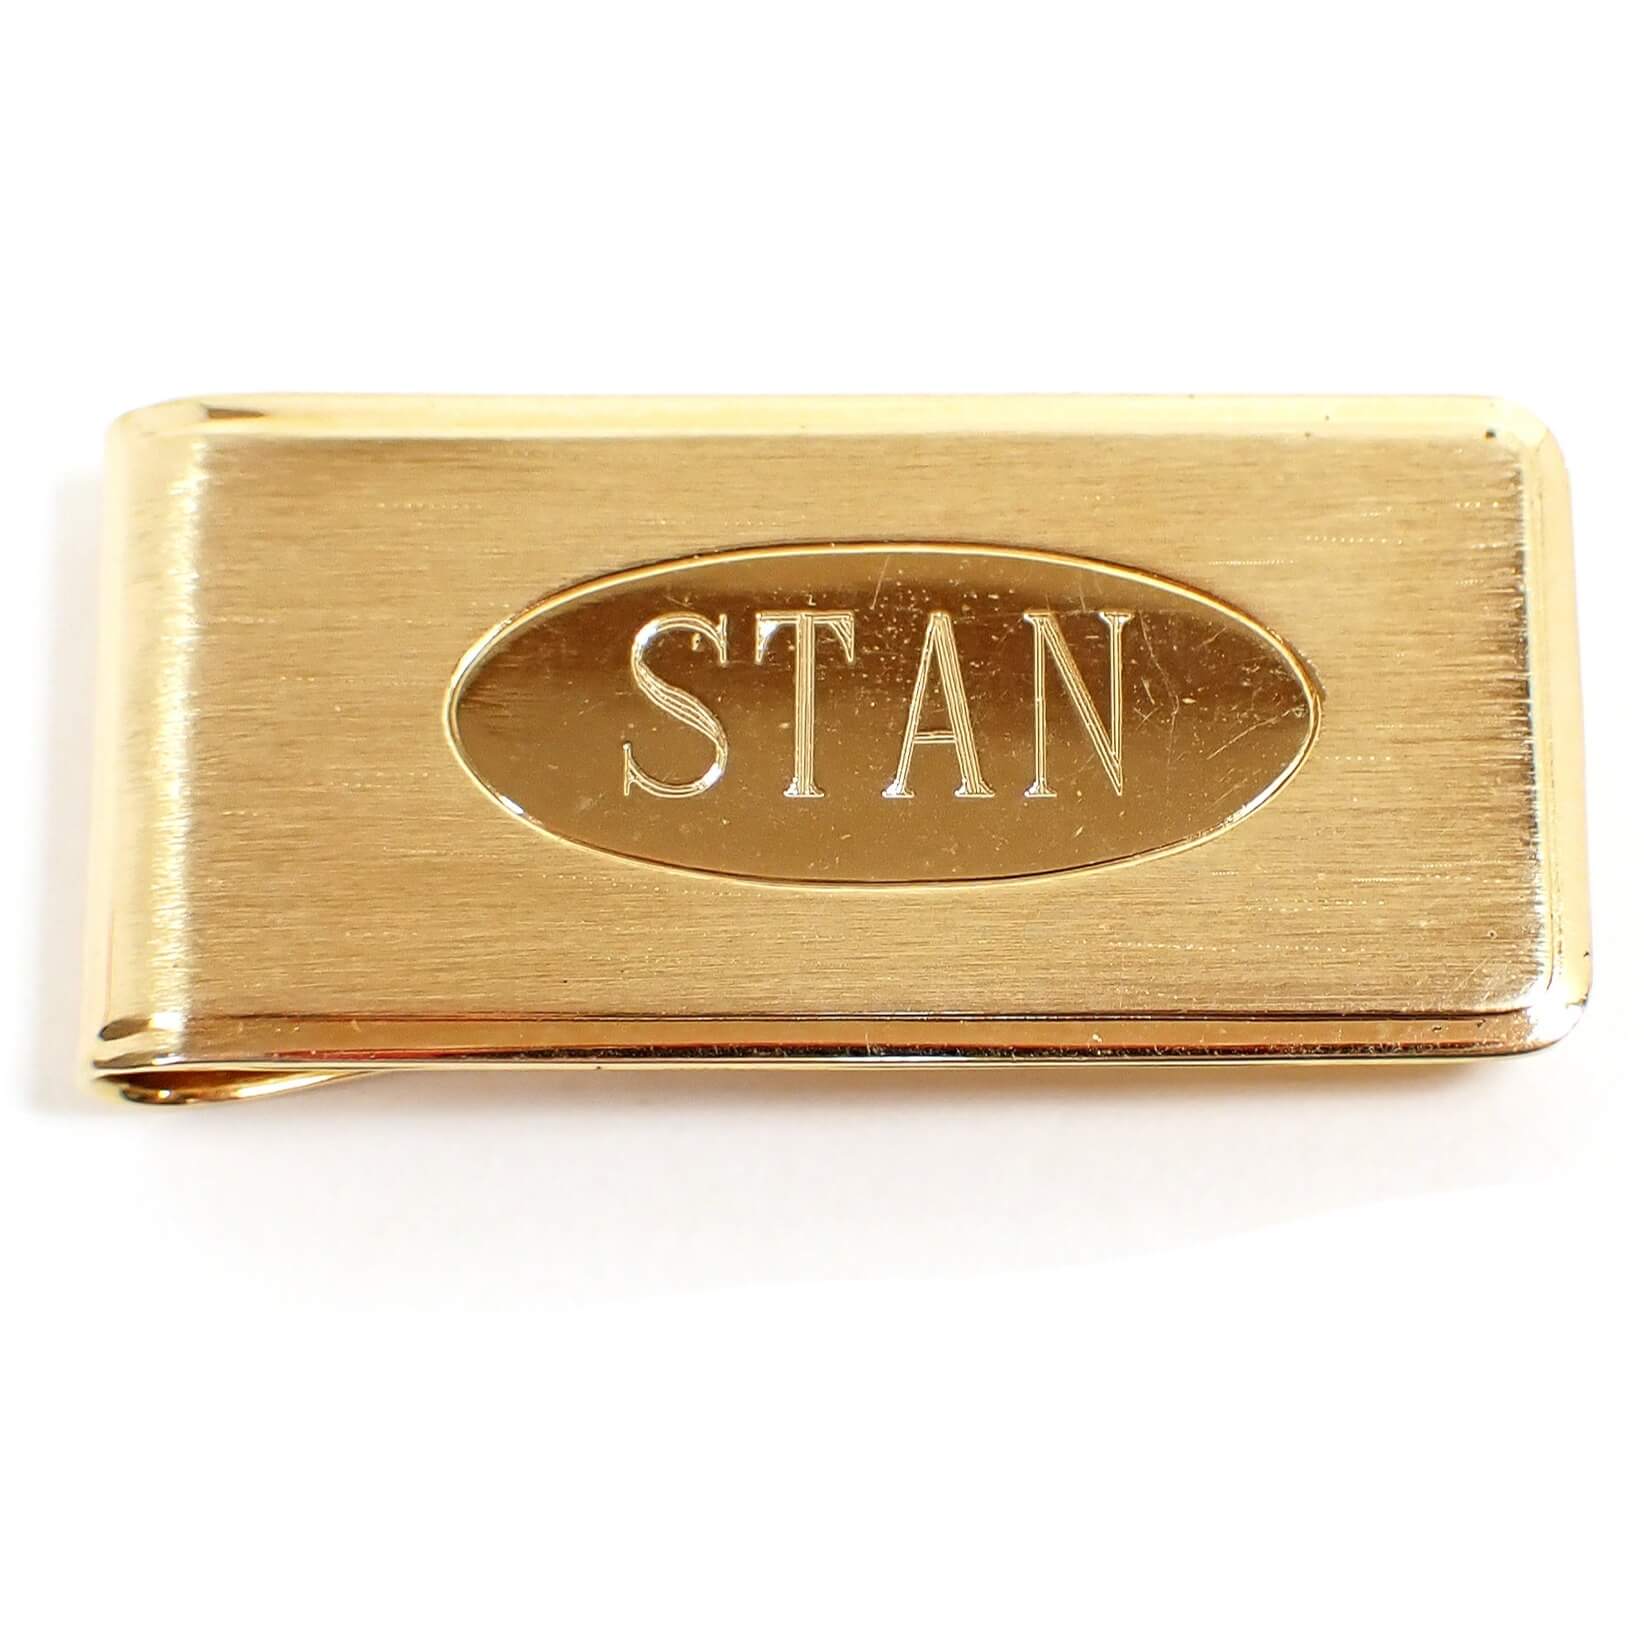 Front view of the retro vintage name money clip. The metal is gold tone in color. The front has a matte brushed finish with a shiny oval in the middle. The name Stan is engraved inside the oval.